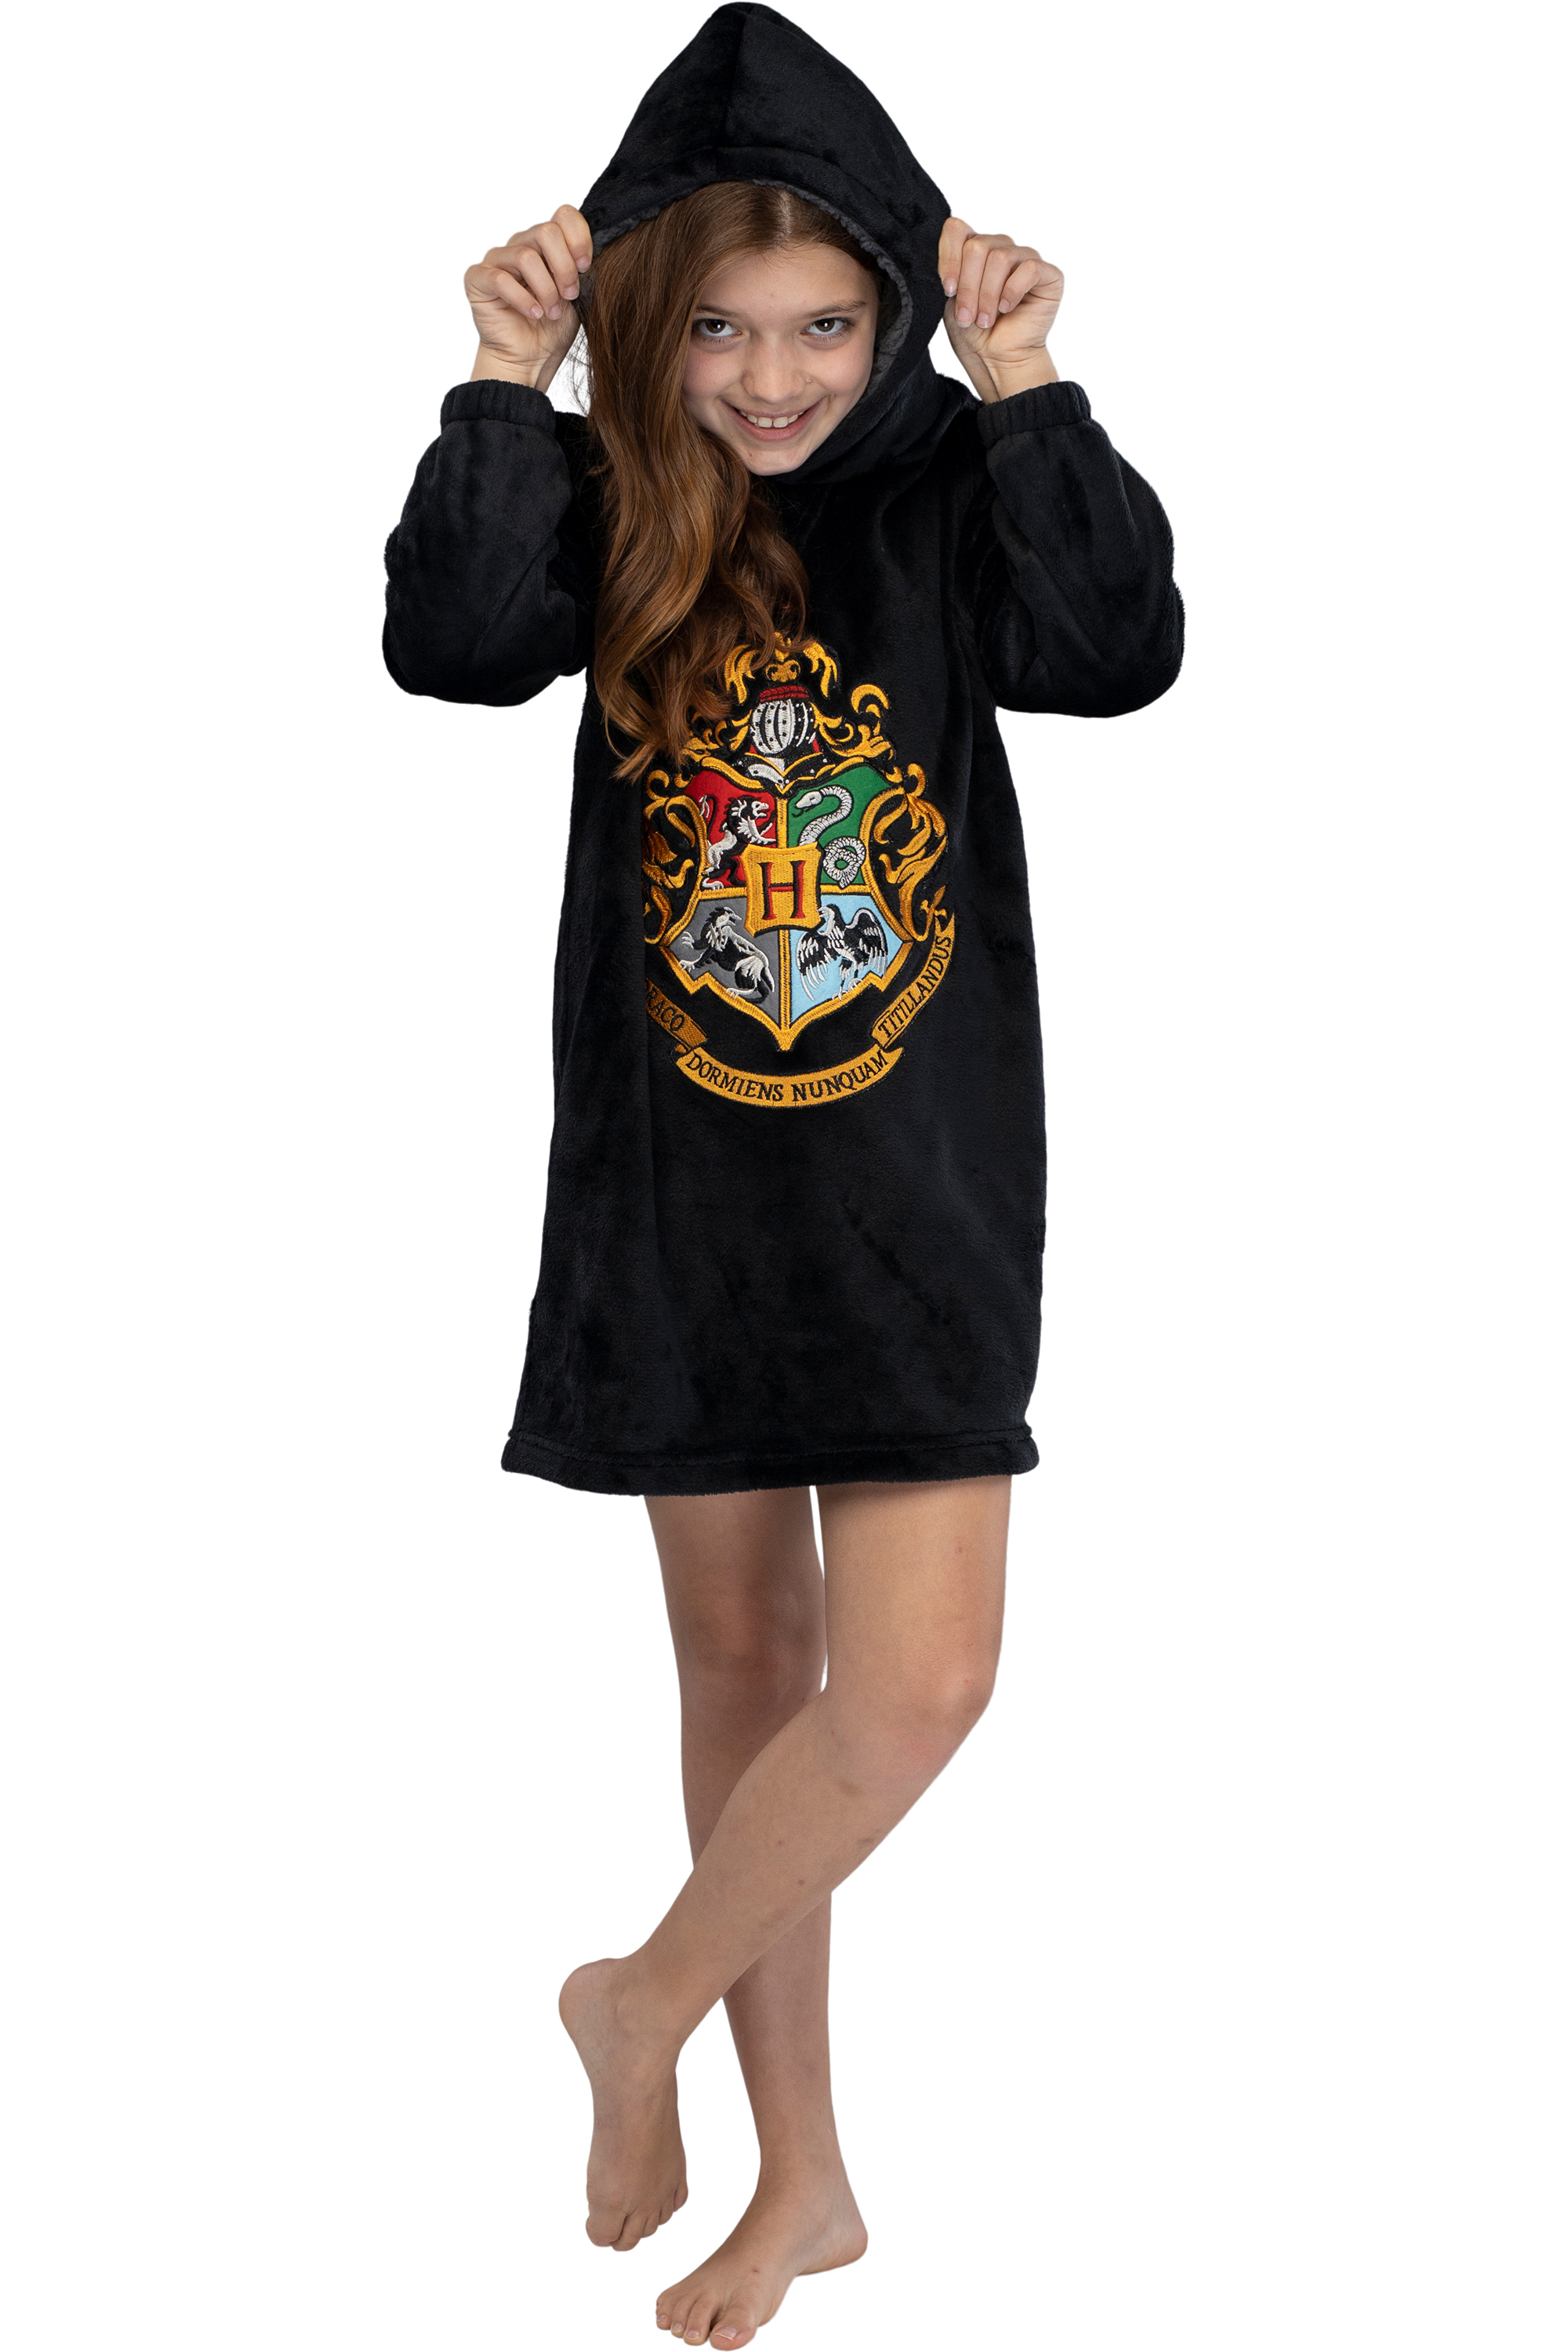 Black Hoodie for Girls and Teens Official Merchandise Harry Potter Hoodies